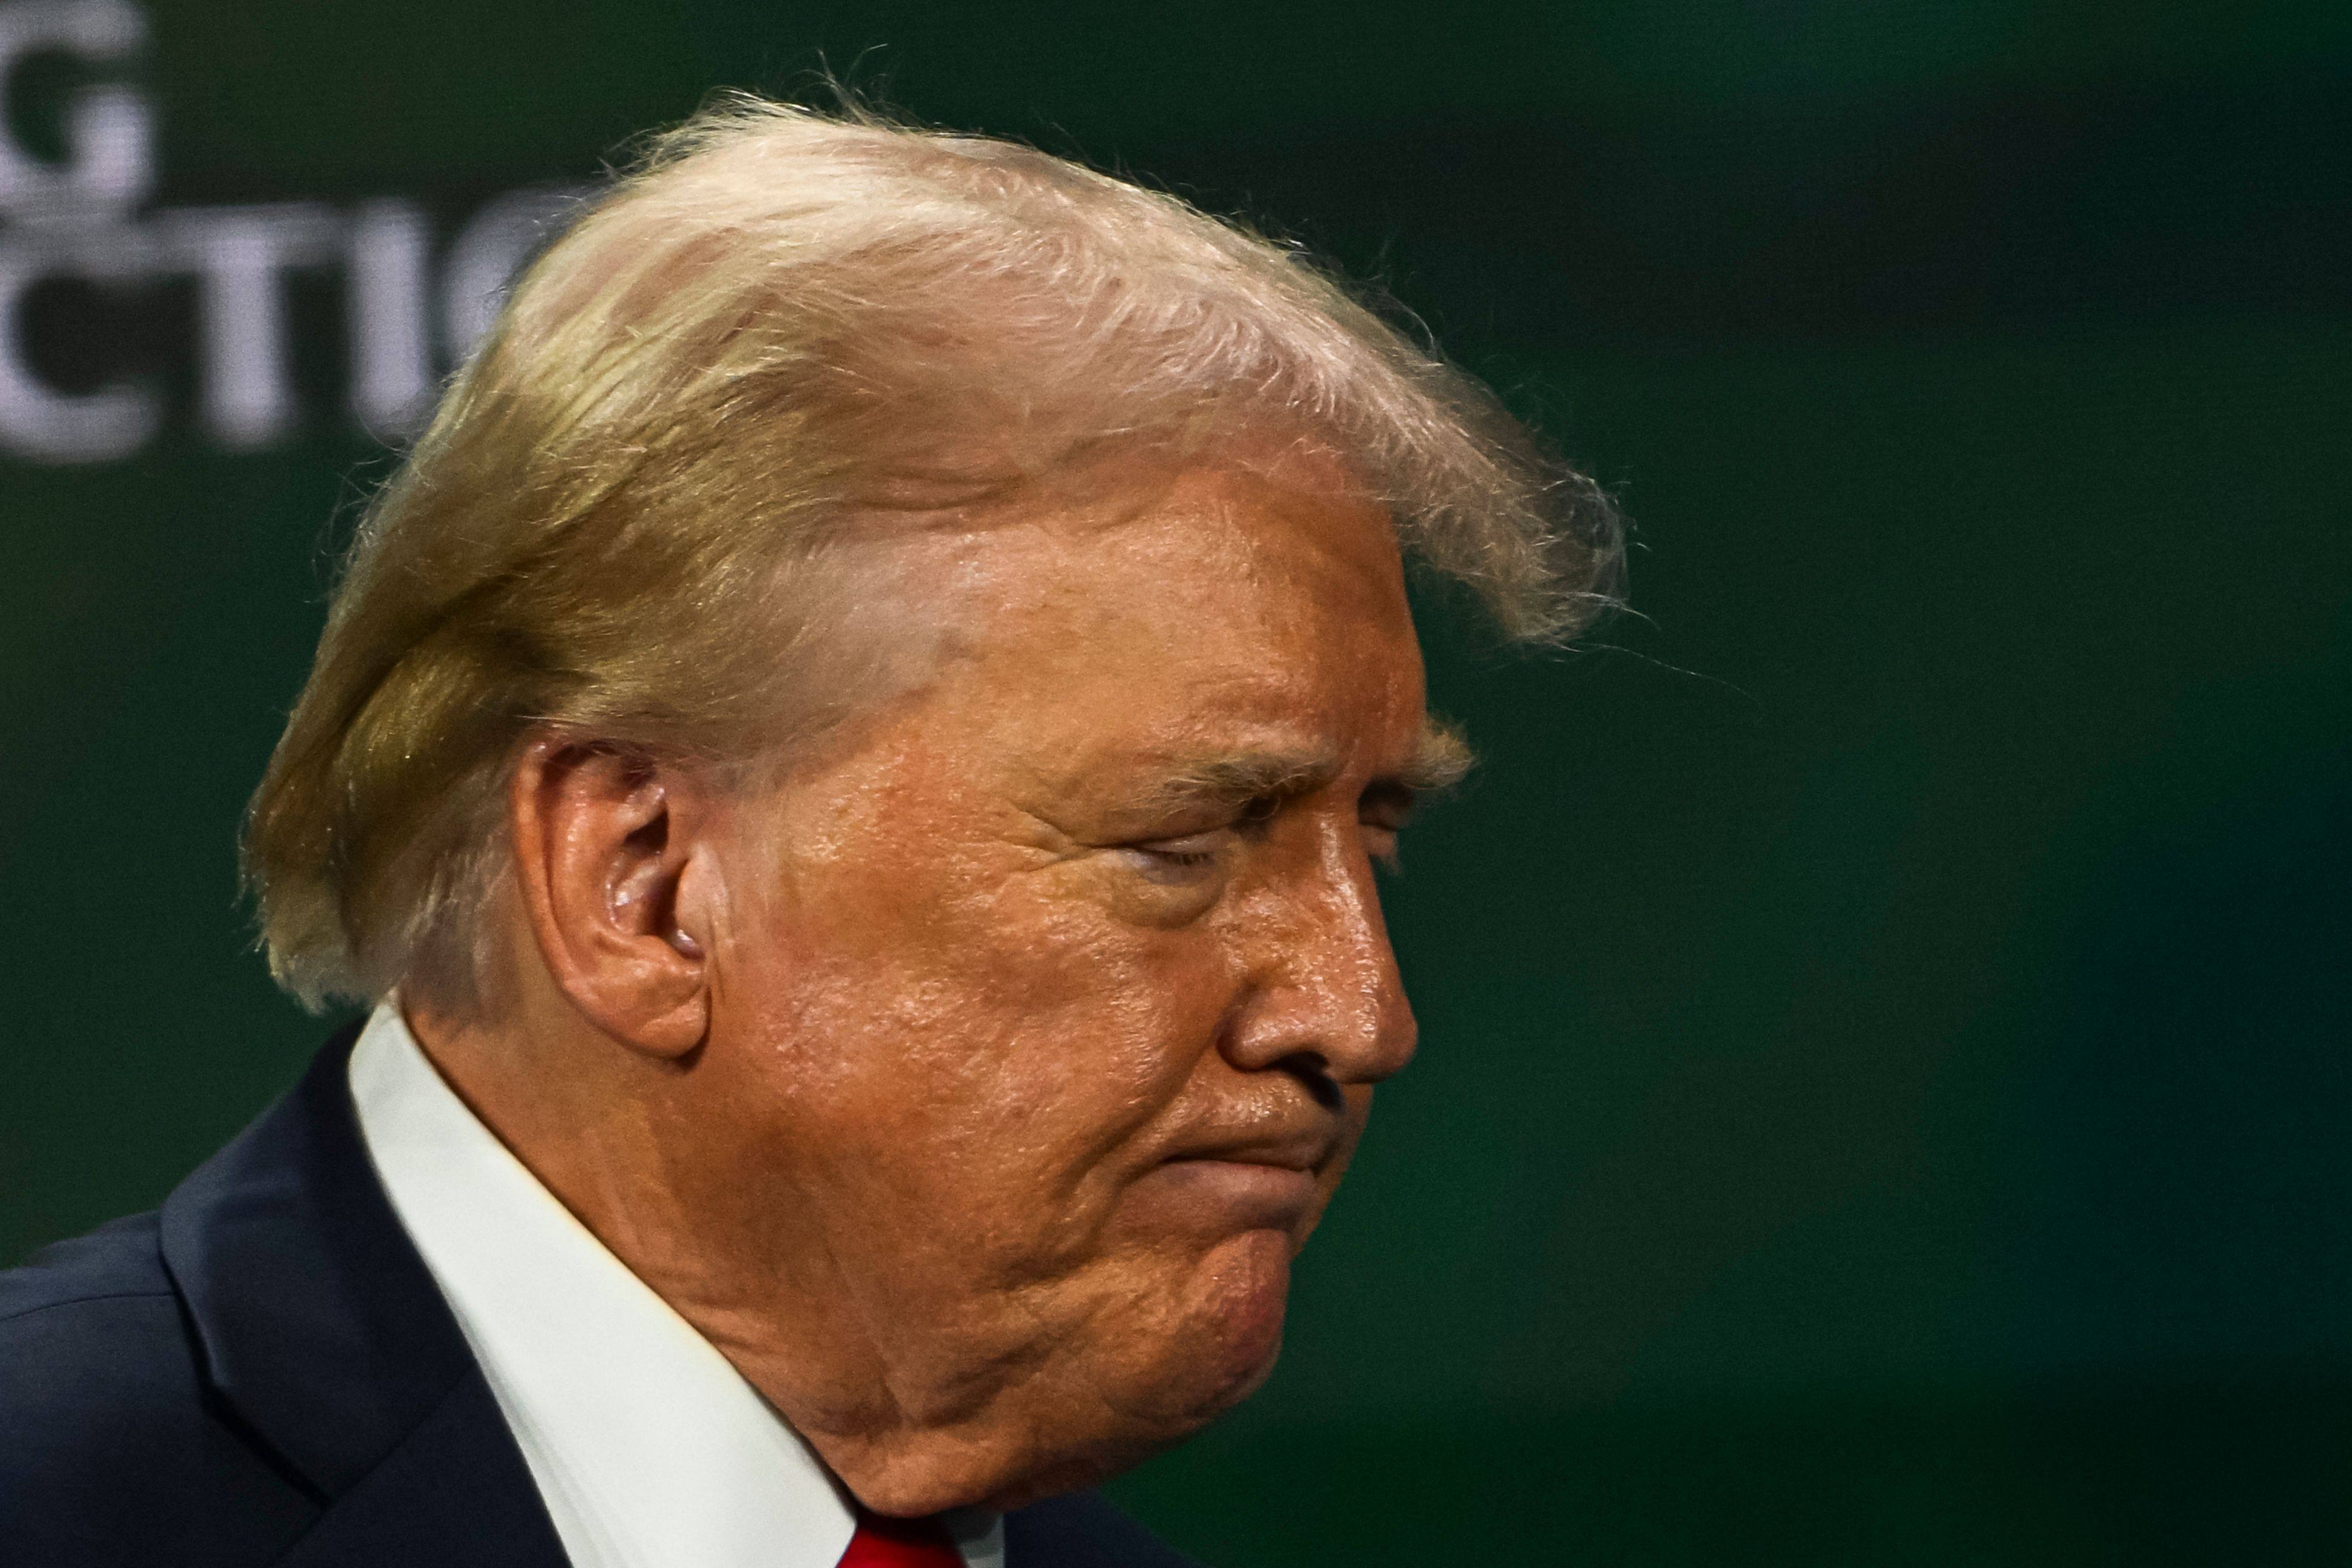 Former US President Donald Trump was seen without a bandage on his ear for the first time since an assassination attempt on July 13. Photo: AFP